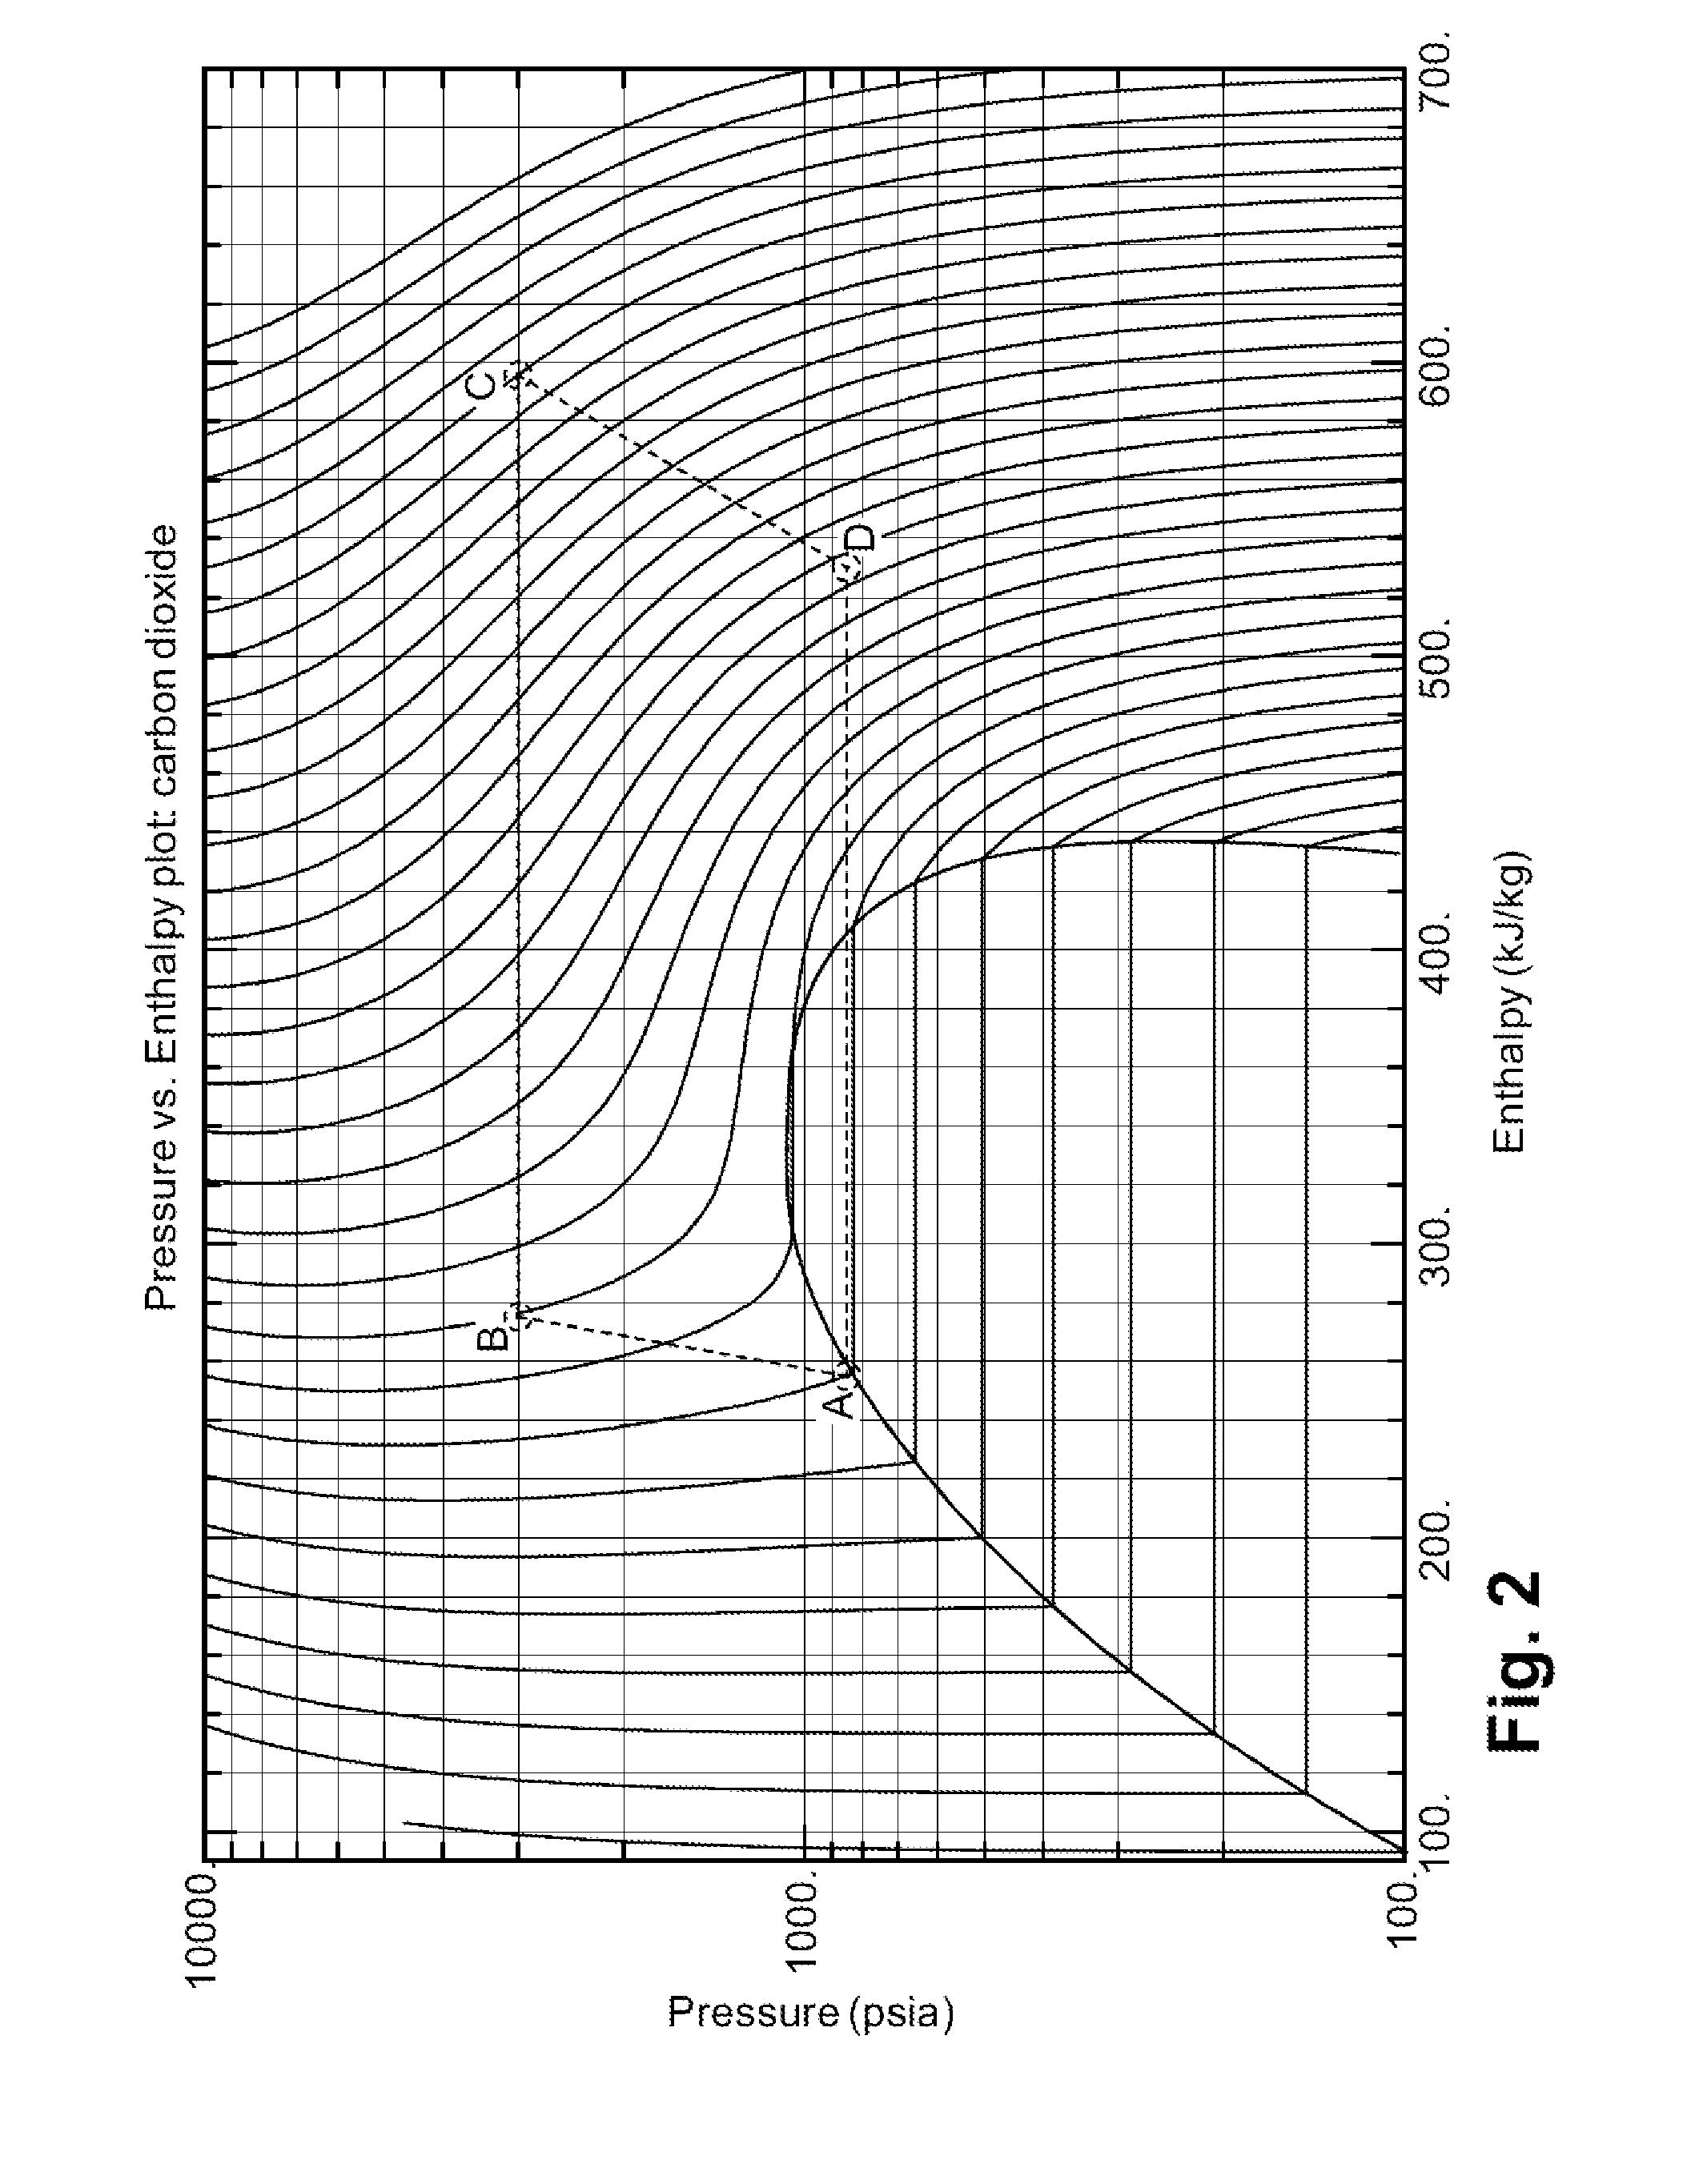 System and method for managing thermal issues in gas turbine engines